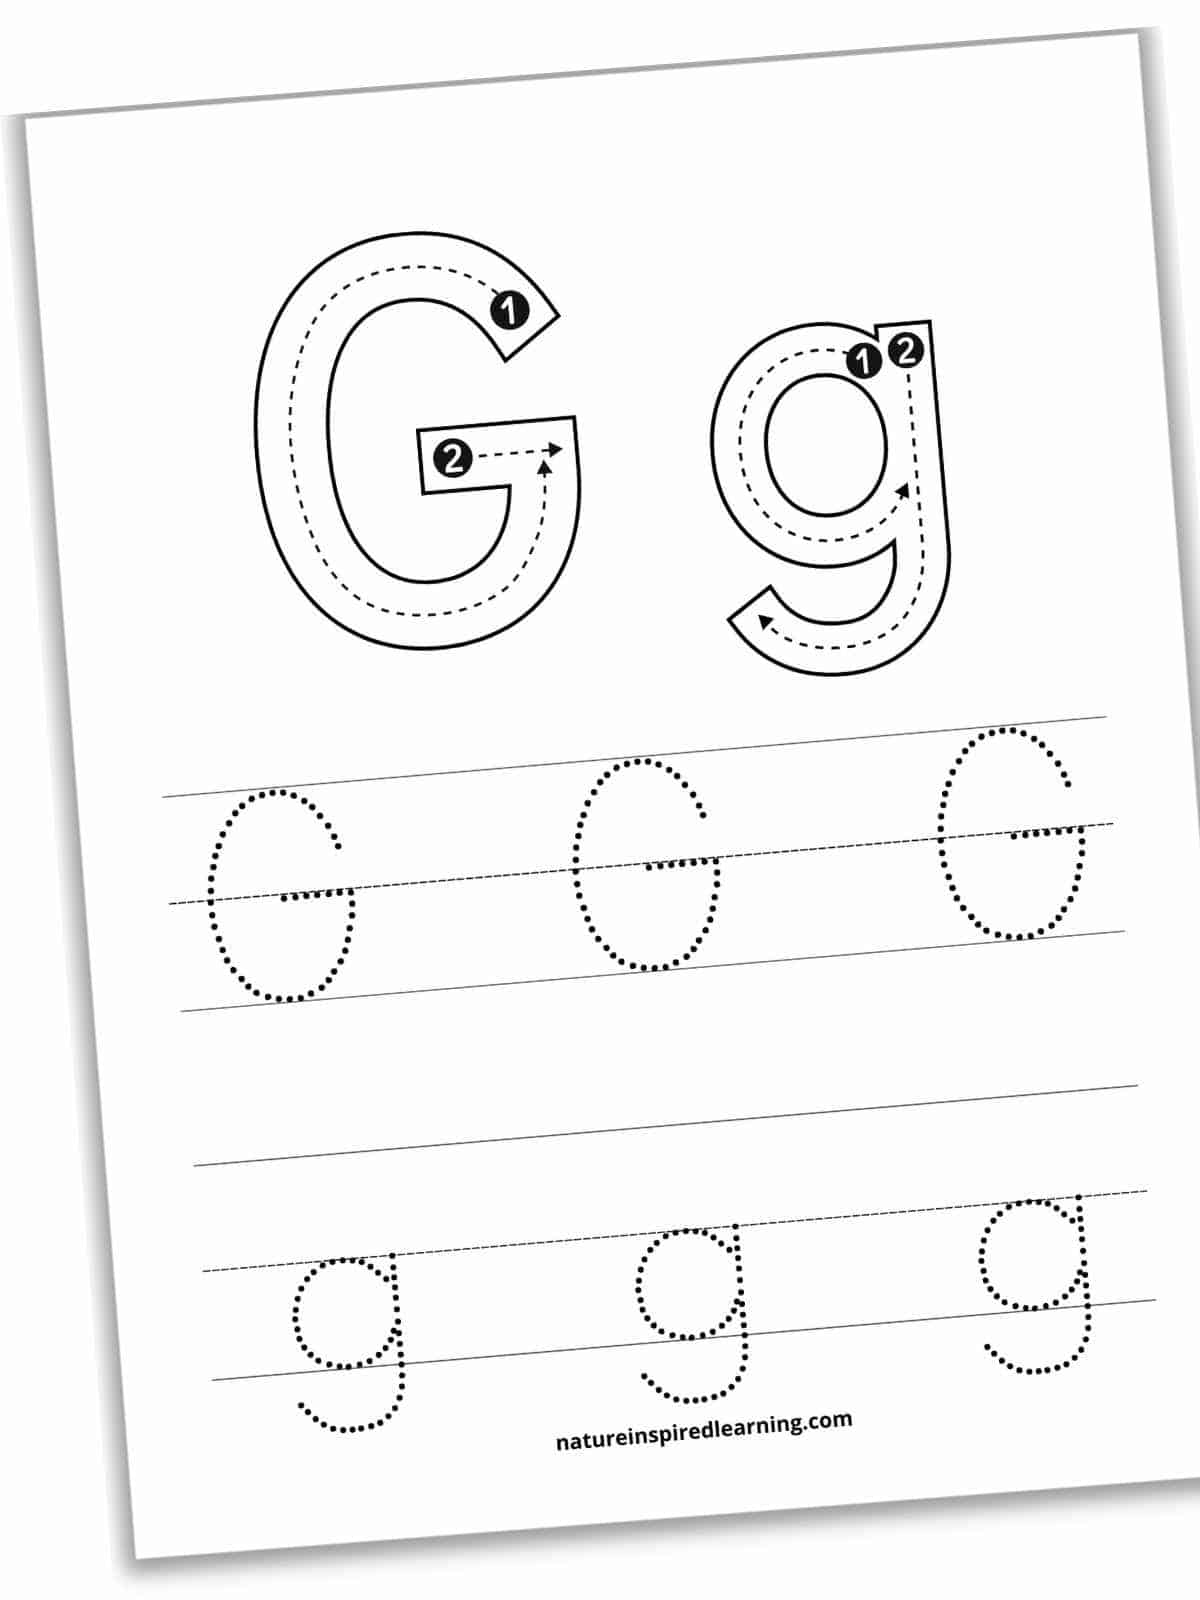 Worksheet with large outlines of G and g with guidelines, arrows, and numbers on the top half with a set of lines with dotted G's and a second set of lines with dotted g's across the bottom. Printable slanted with a drop shadow.